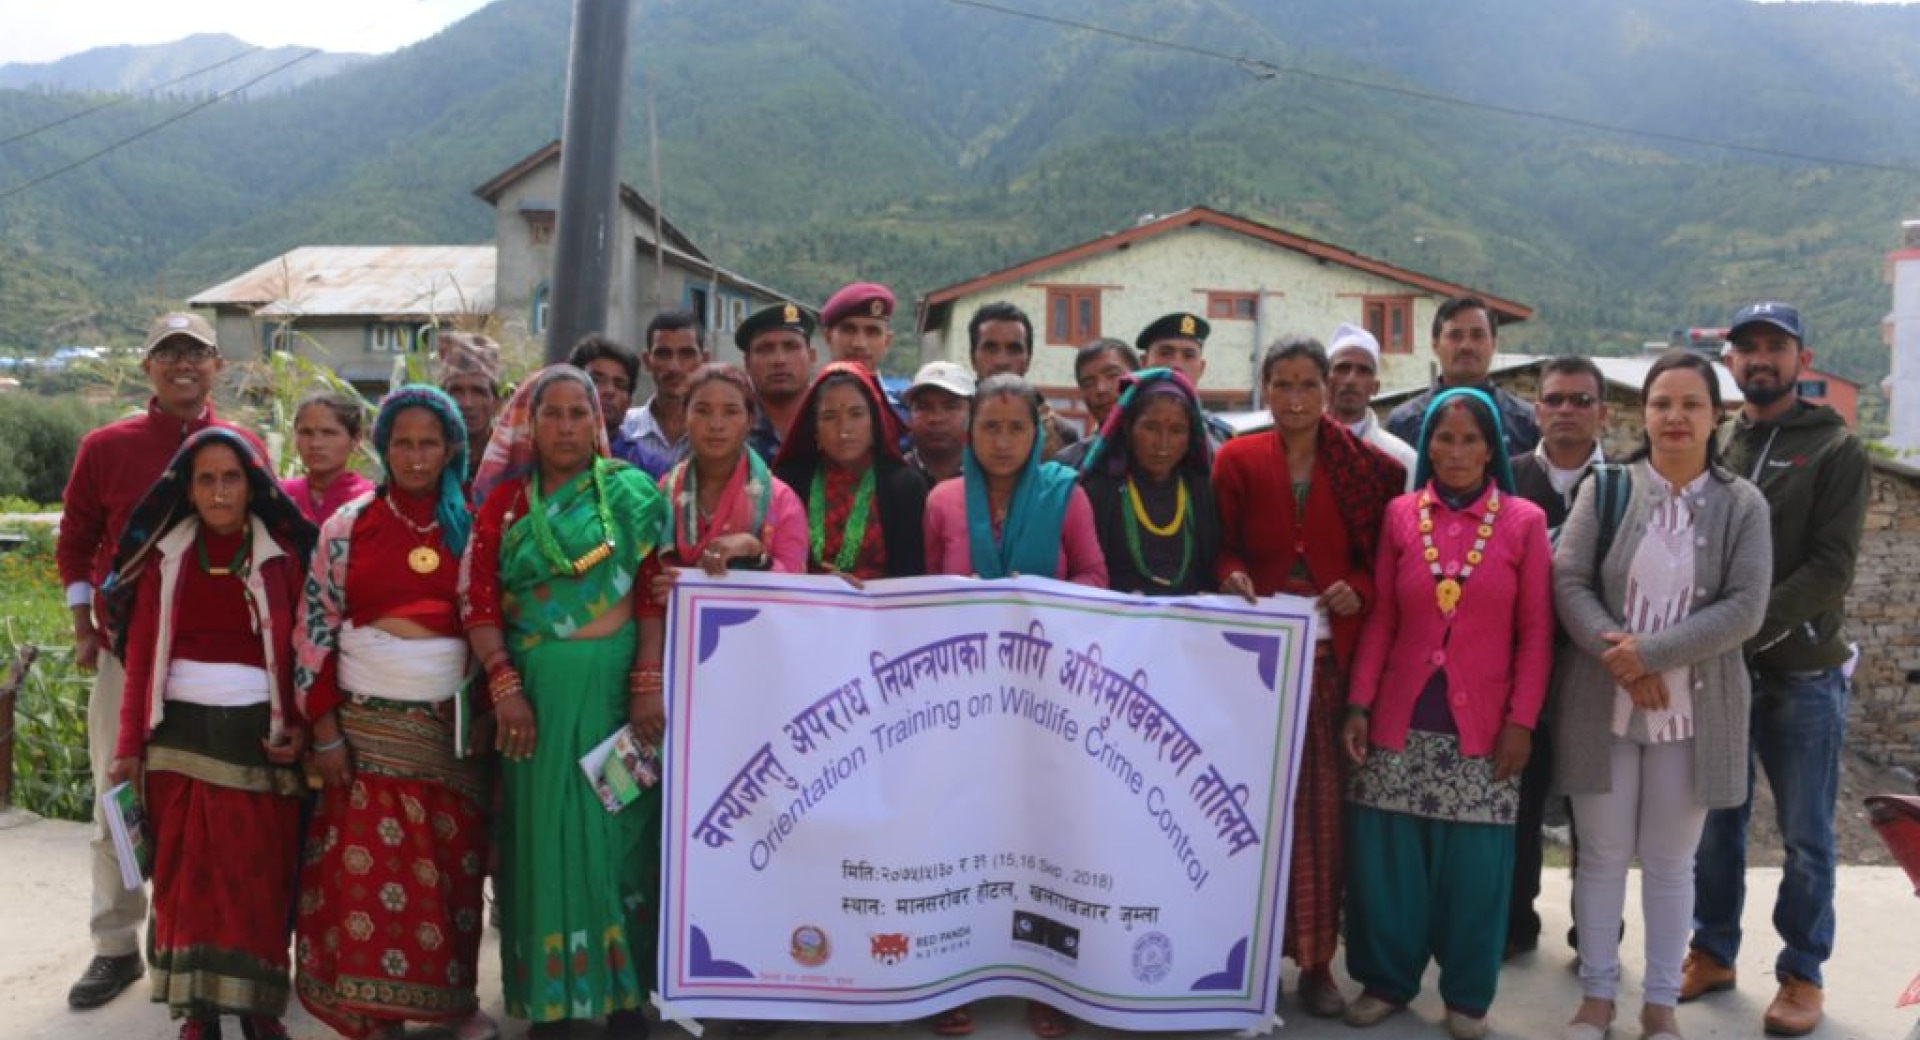 Stop the Trade: Kickoff in Western Nepal